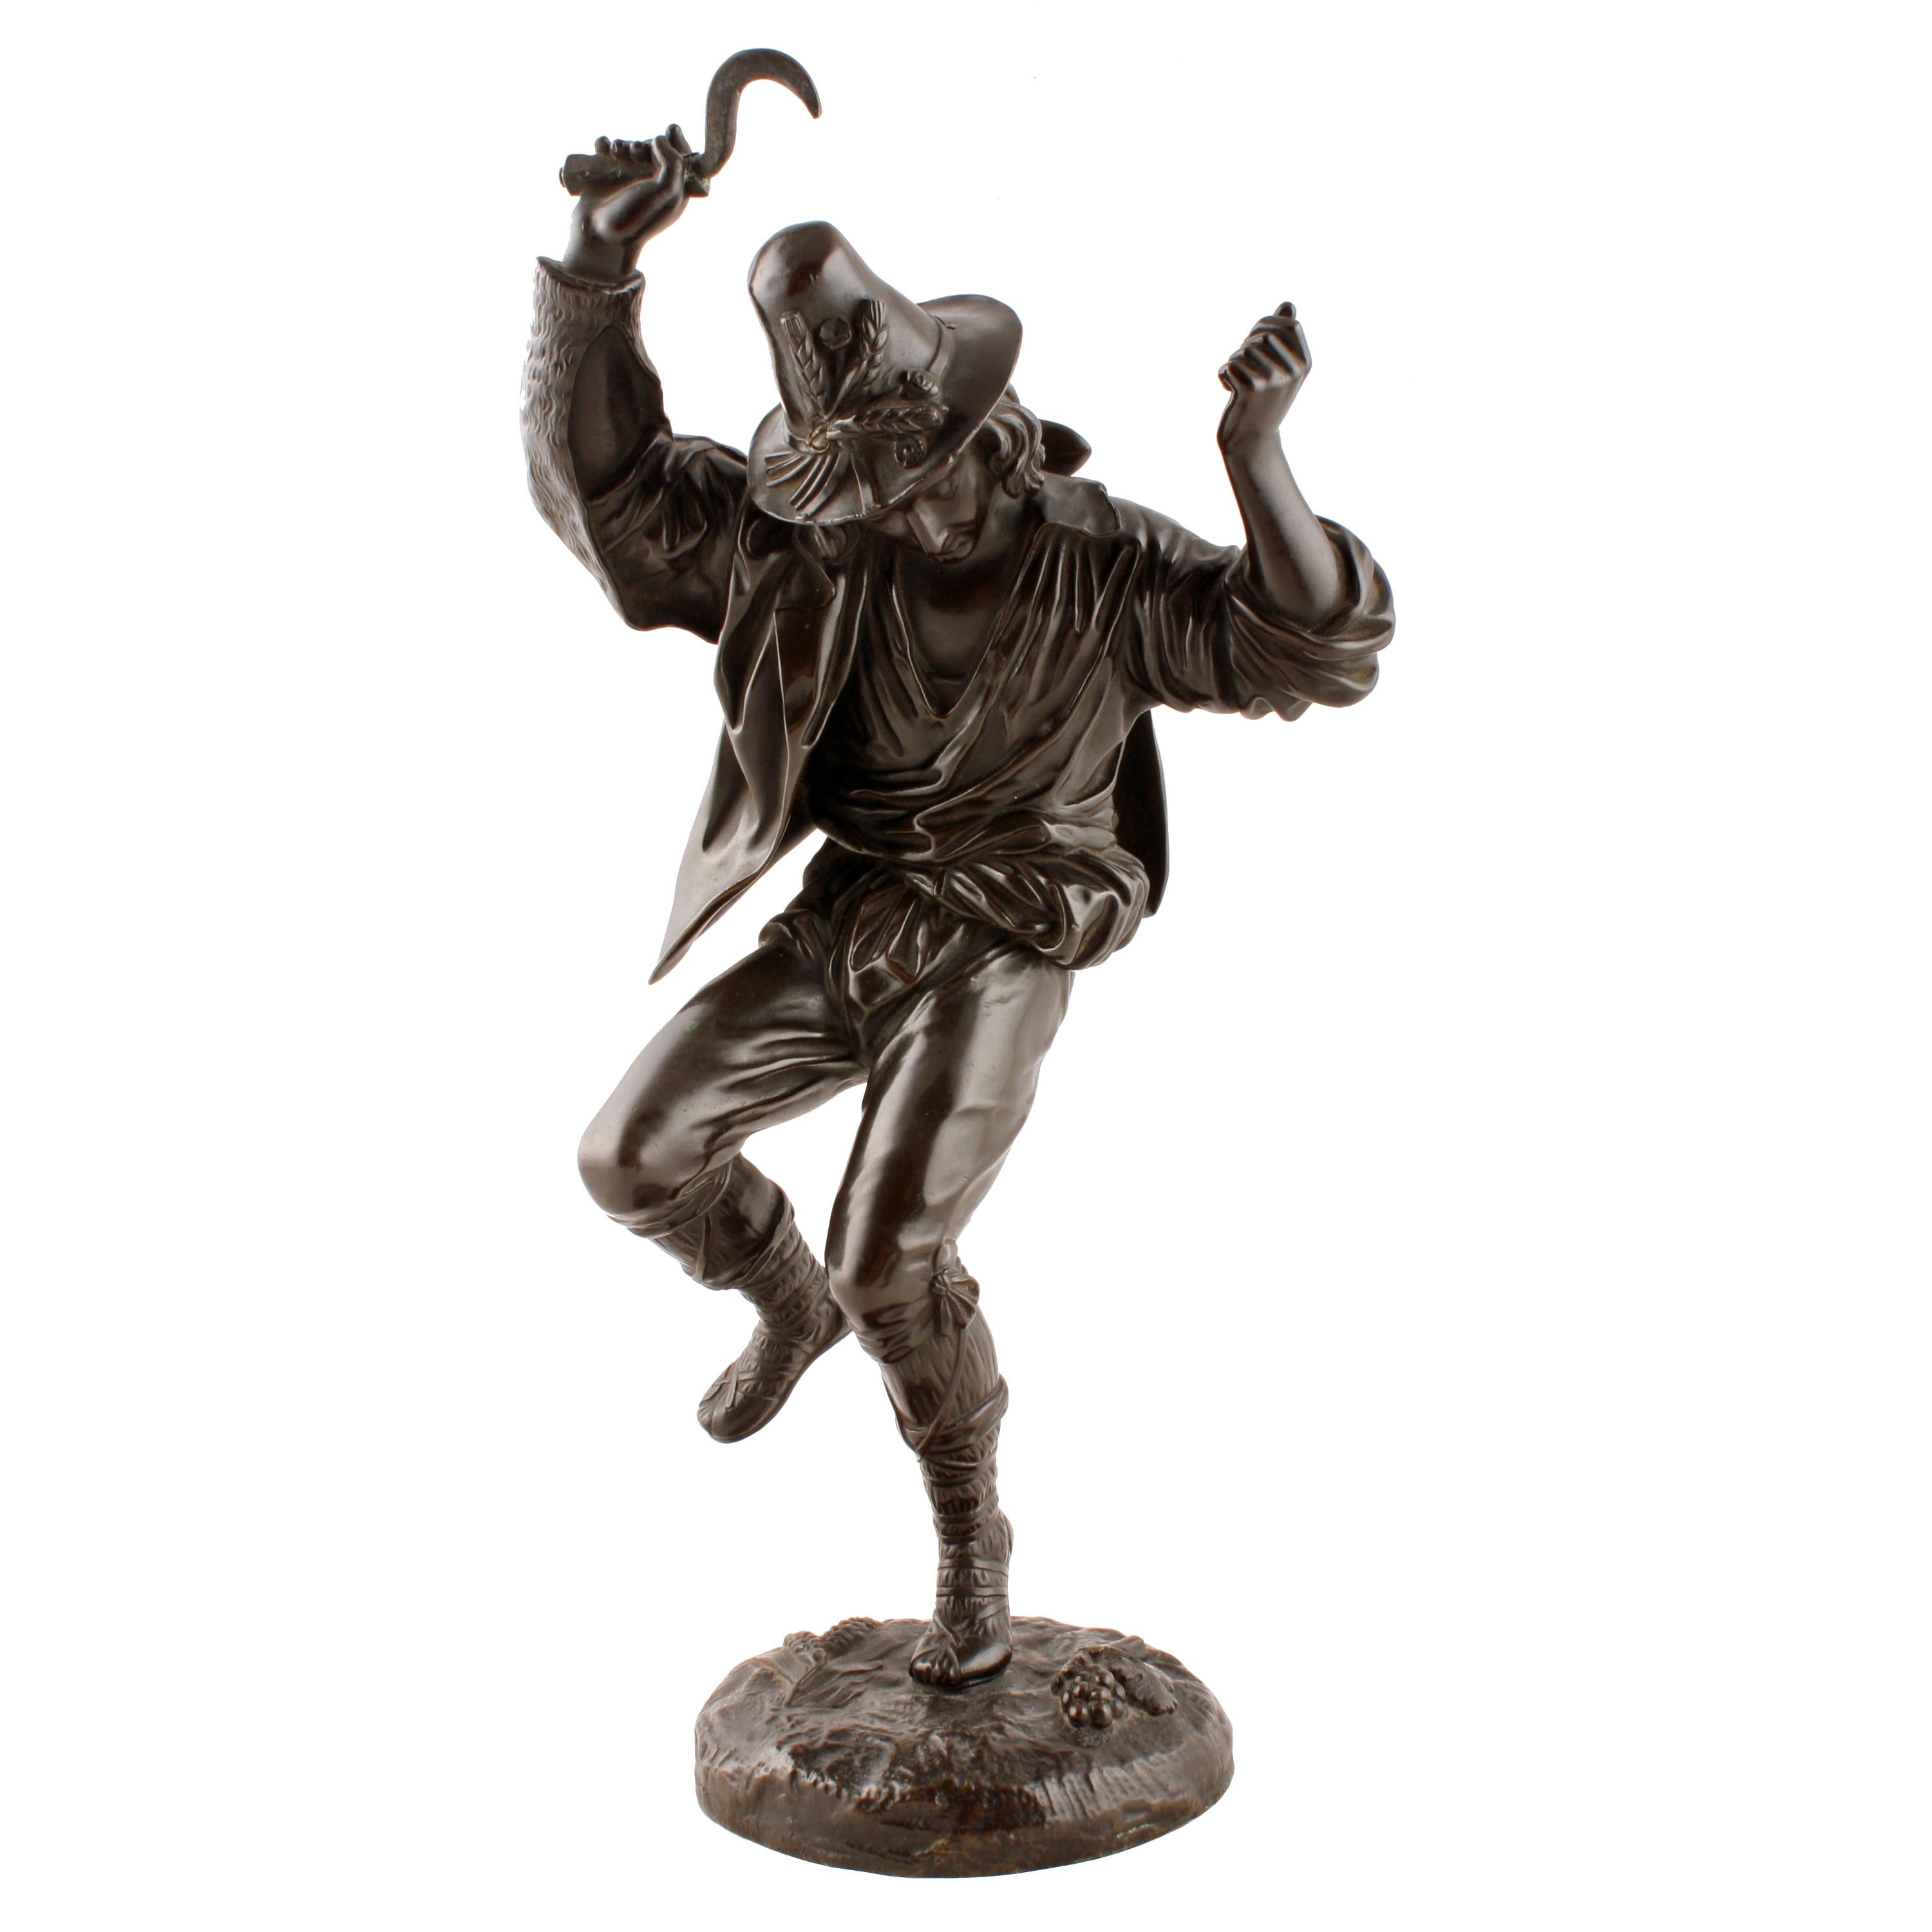 
A pair of 19th century bronze male and female figures of dancing peasants.

The female figure is of a young lady dancing and playing a tambourine in a flowing dress and with grapes and wheat at her feet.

The male figure is of a young man